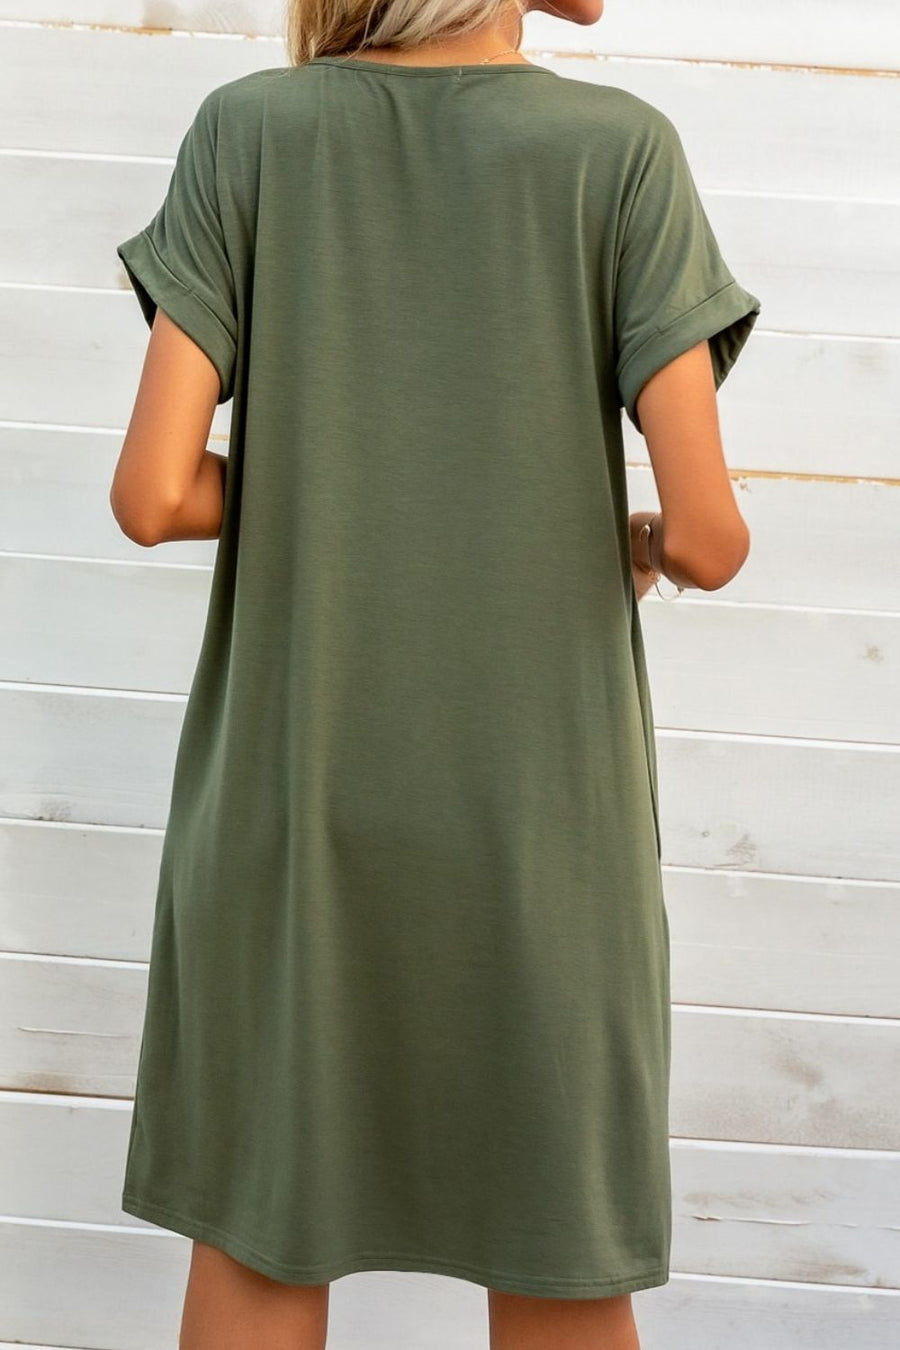 Totally Into Tees Pocket Dress